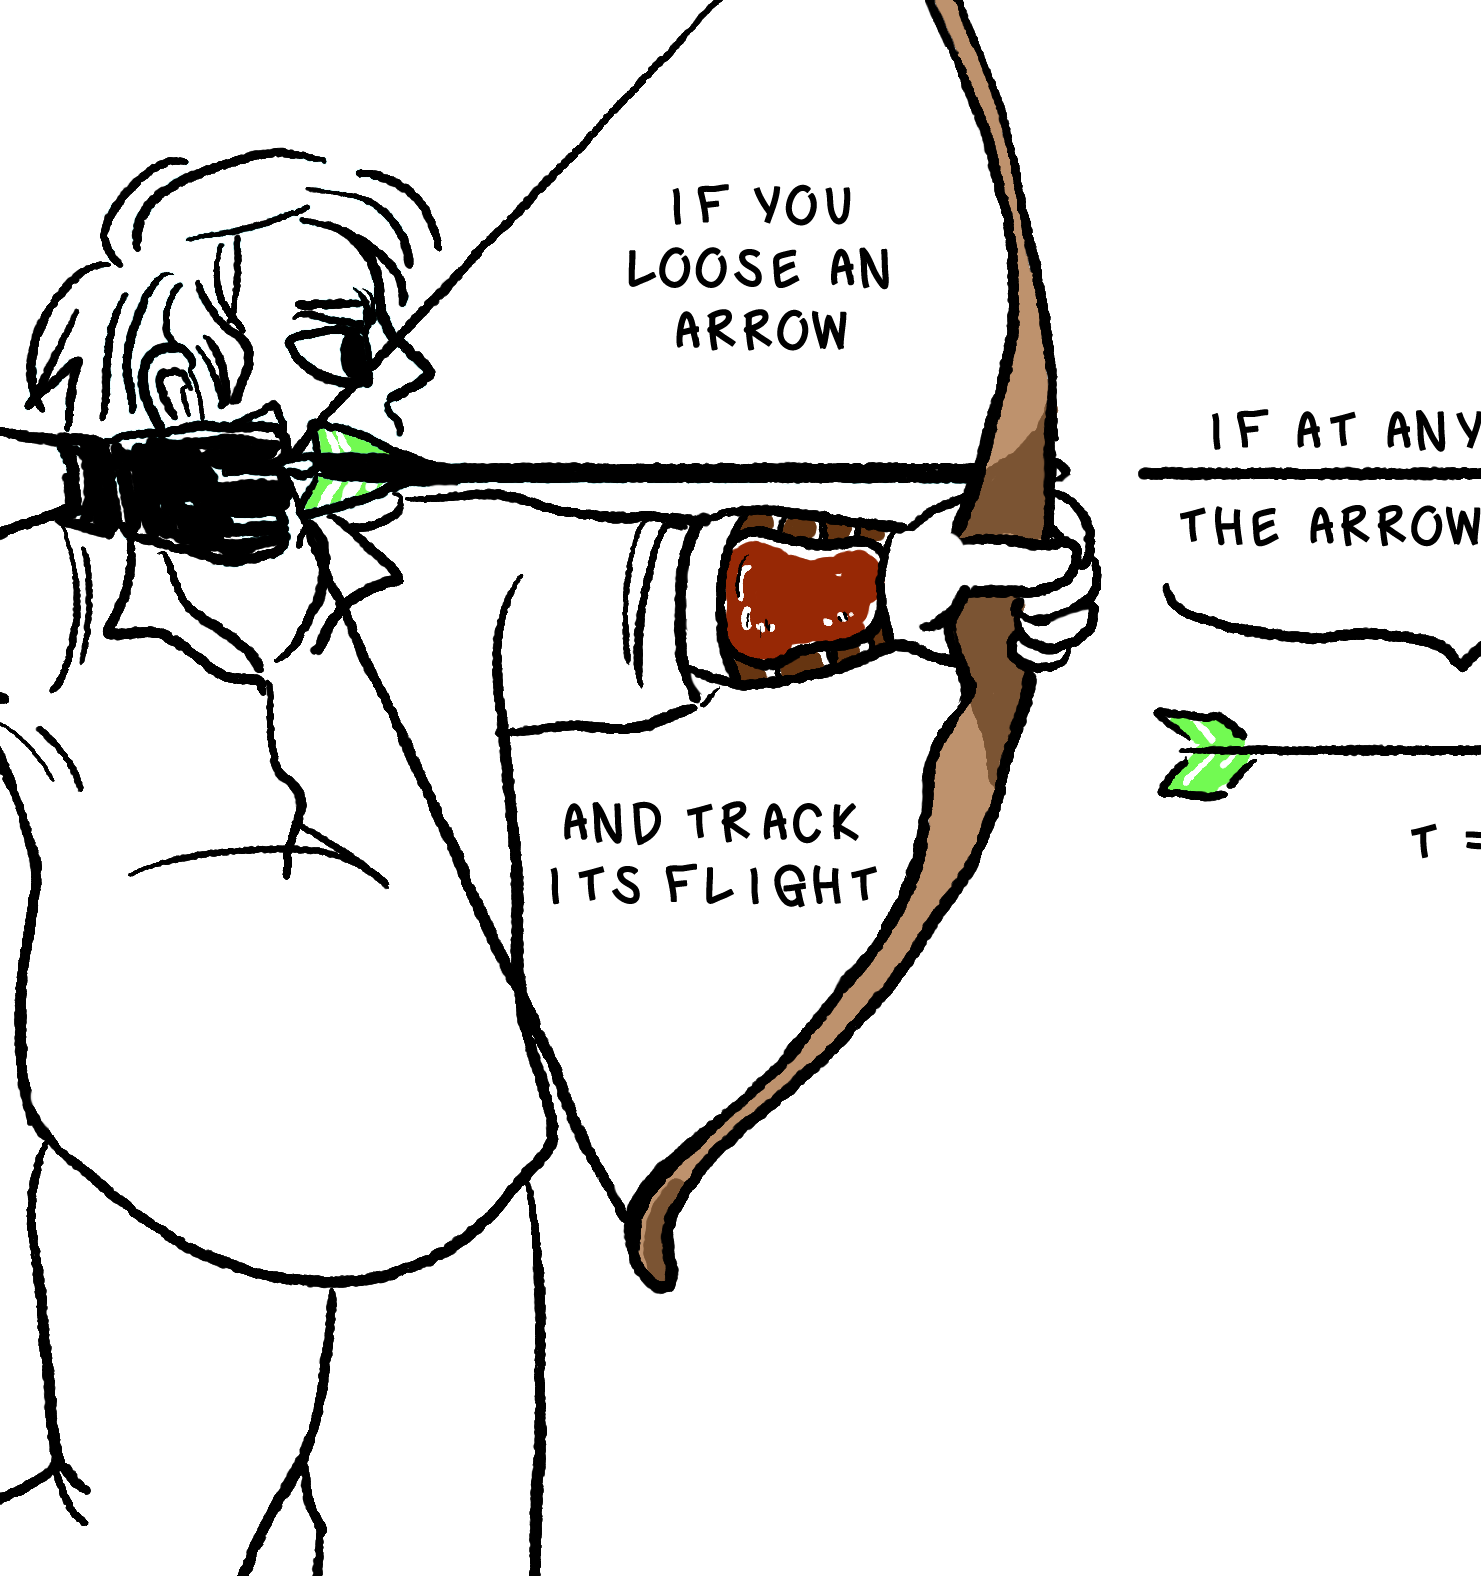 As you keep scrolling, Elk stands up straight and pulls back the arrow, readying to shoot. He looks very focused, his brow furrowed in concentration. The bright green fletching of the arrow stands out against the black and white drawing. Elk says, 'Zeno argues that if an instant lasts zero seconds... each instant is essentially immobile.